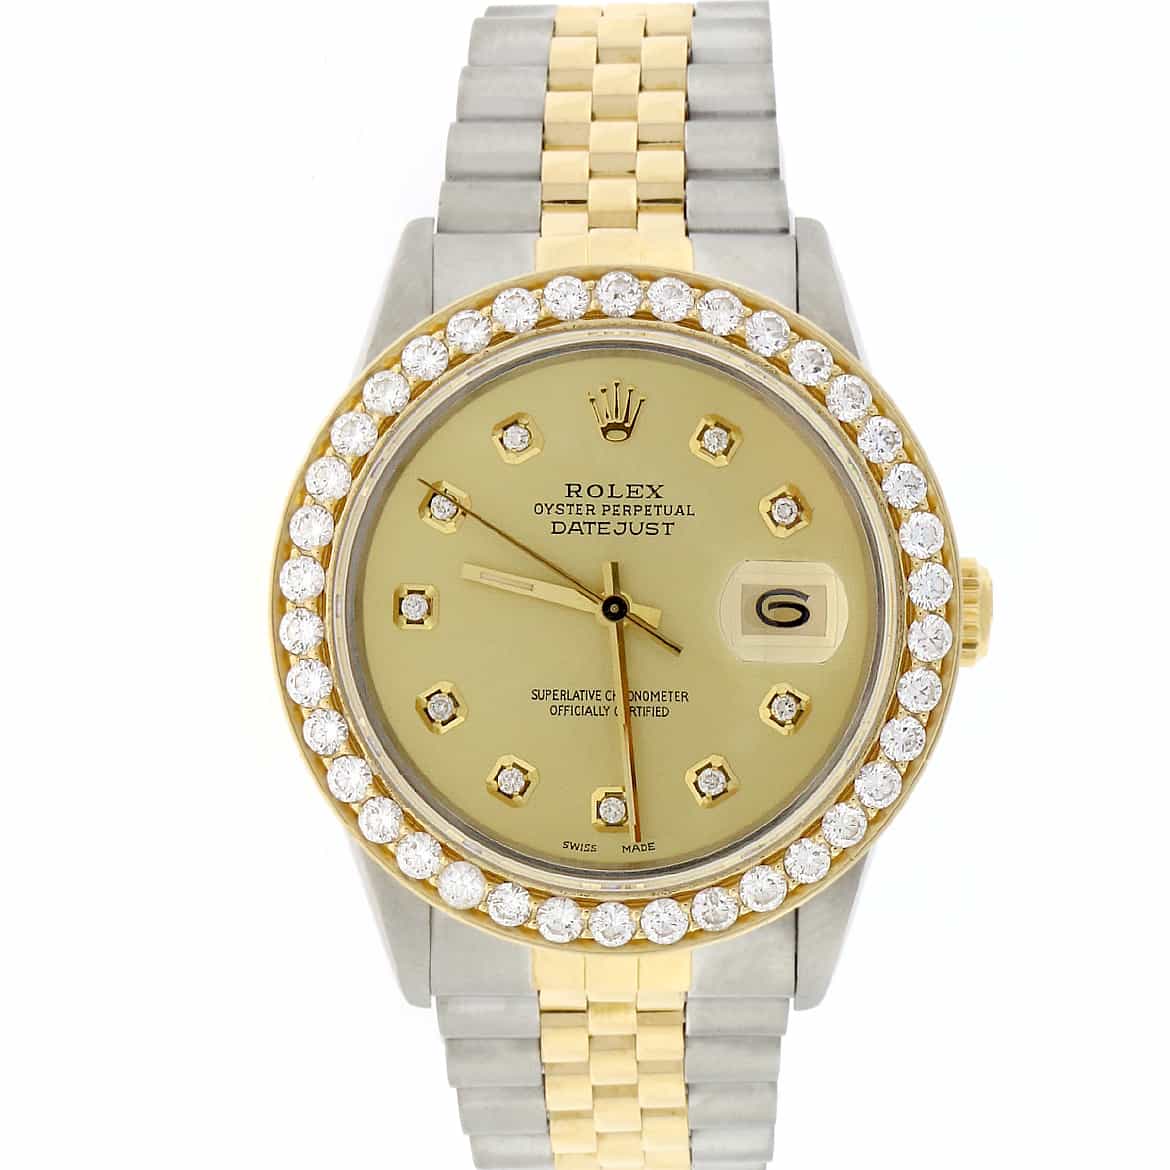 Rolex 2-Tone 18K Yellow Gold & Stainless Steel Automatic